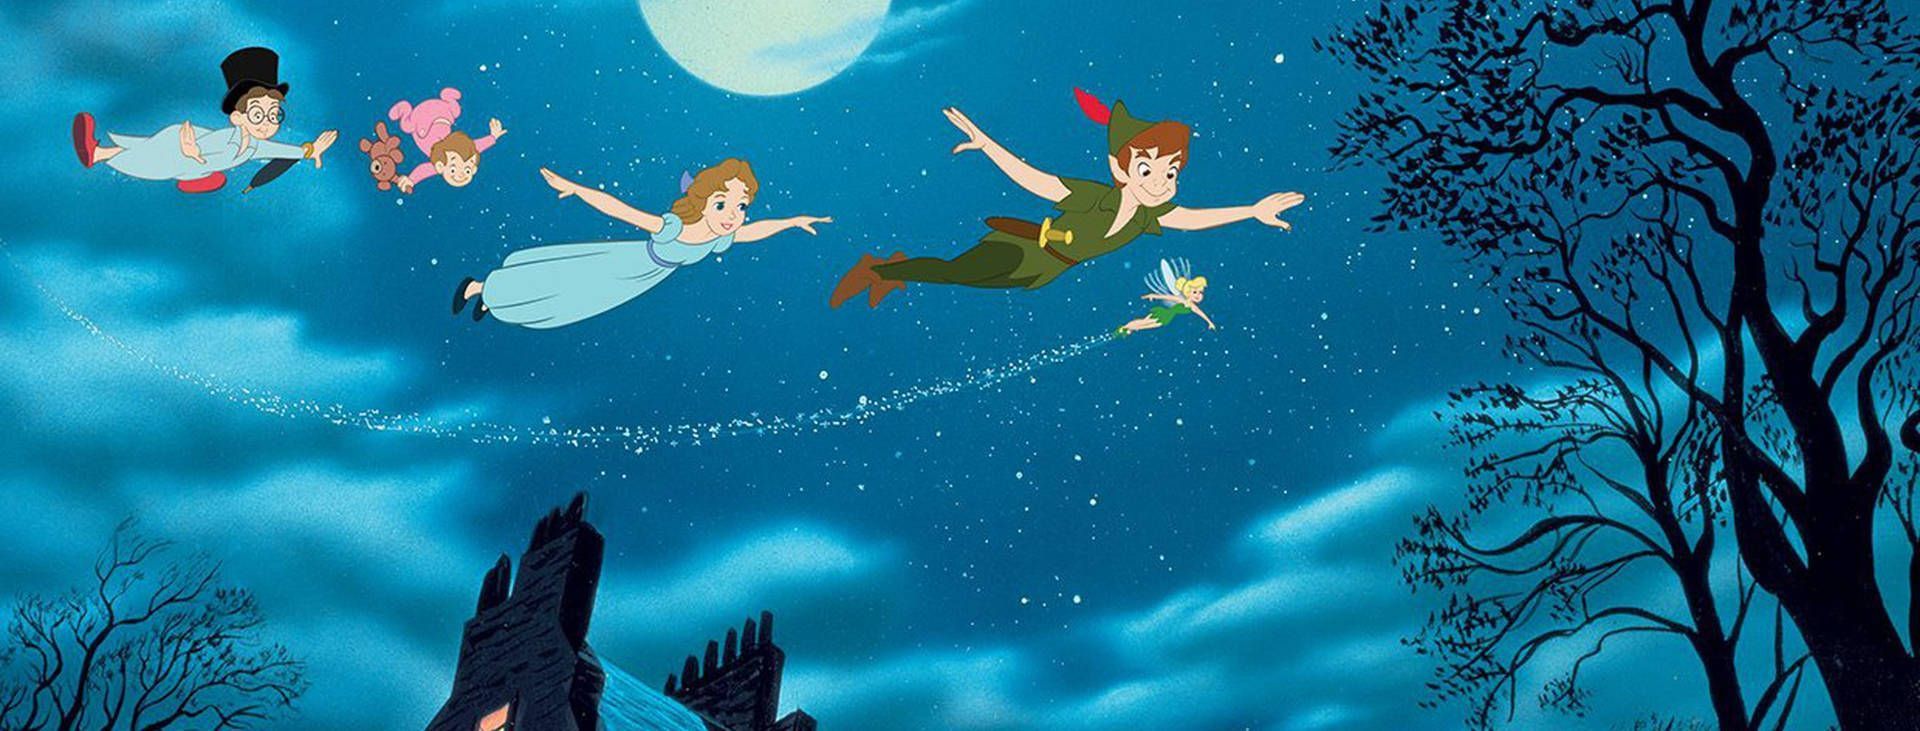 Peter Pan flying with Wendy and the Lost Boys over Neverland - Peter Pan